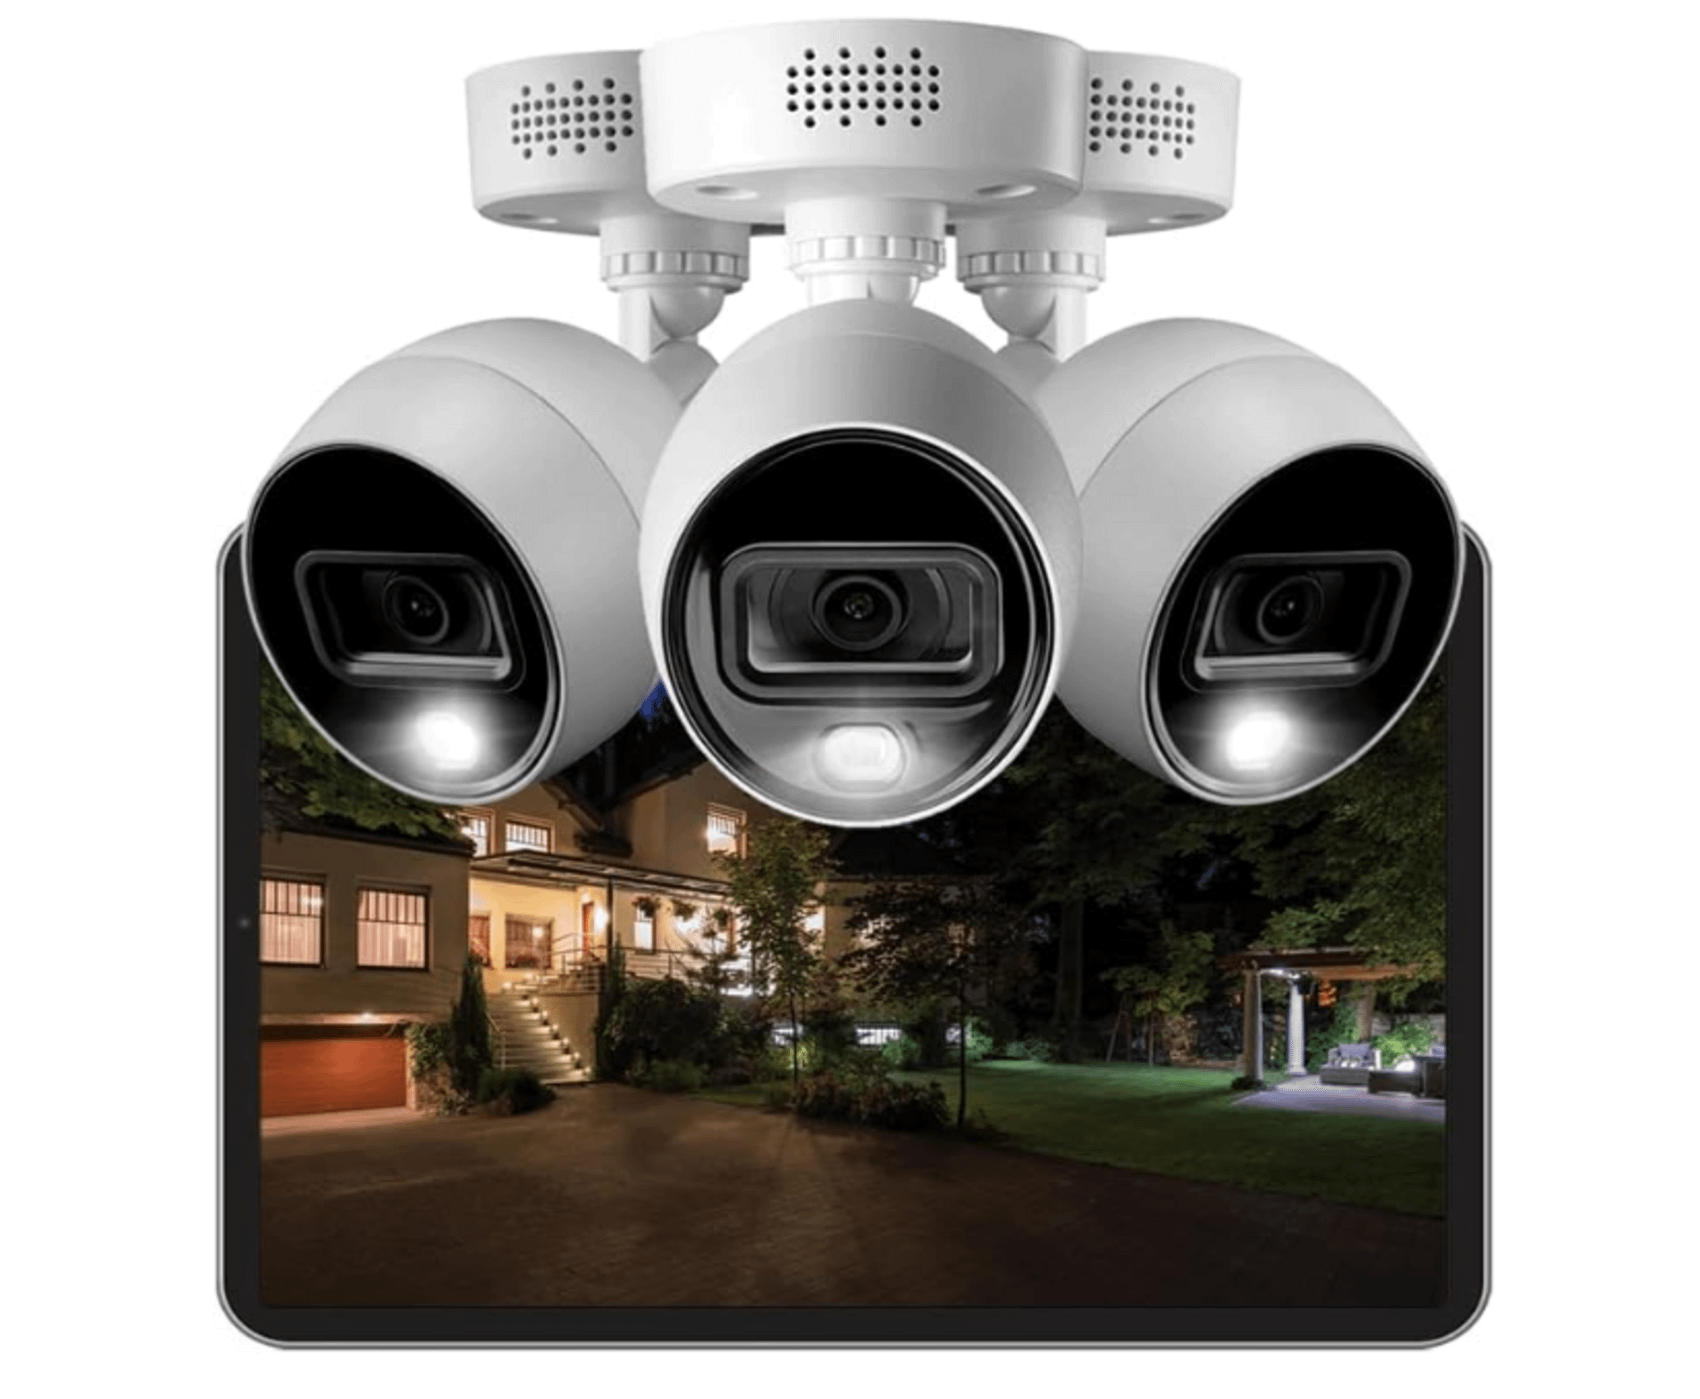 Three cameras above and a picture of a house at night below